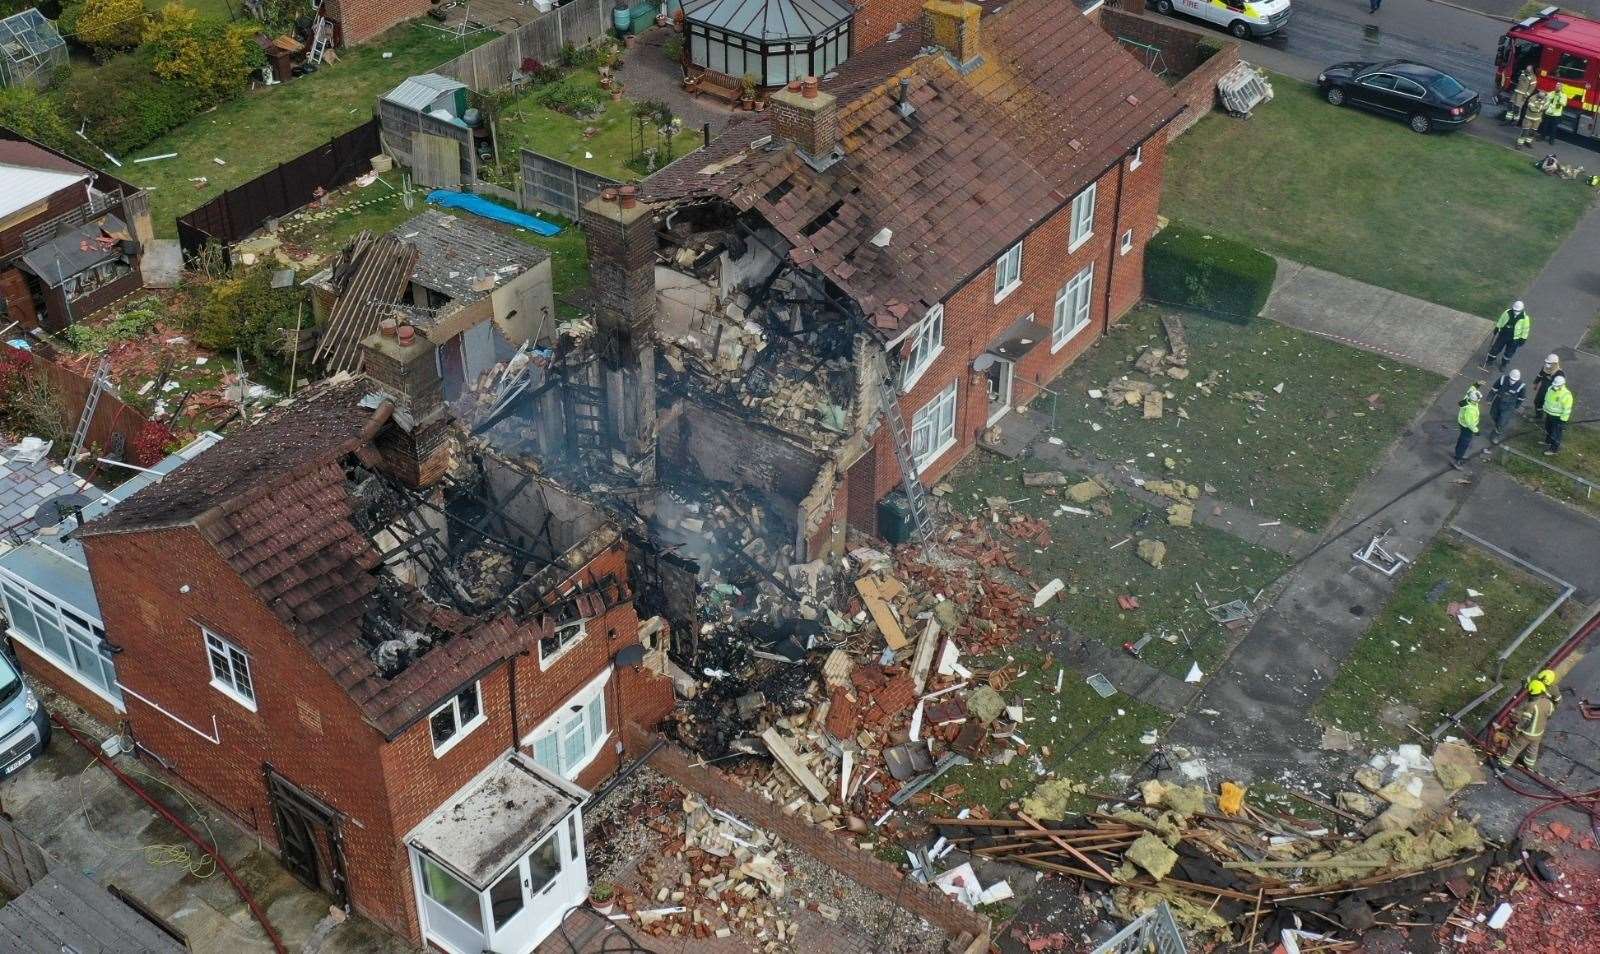 Seven people were injured in a gas explosion in Mill View, Ashford